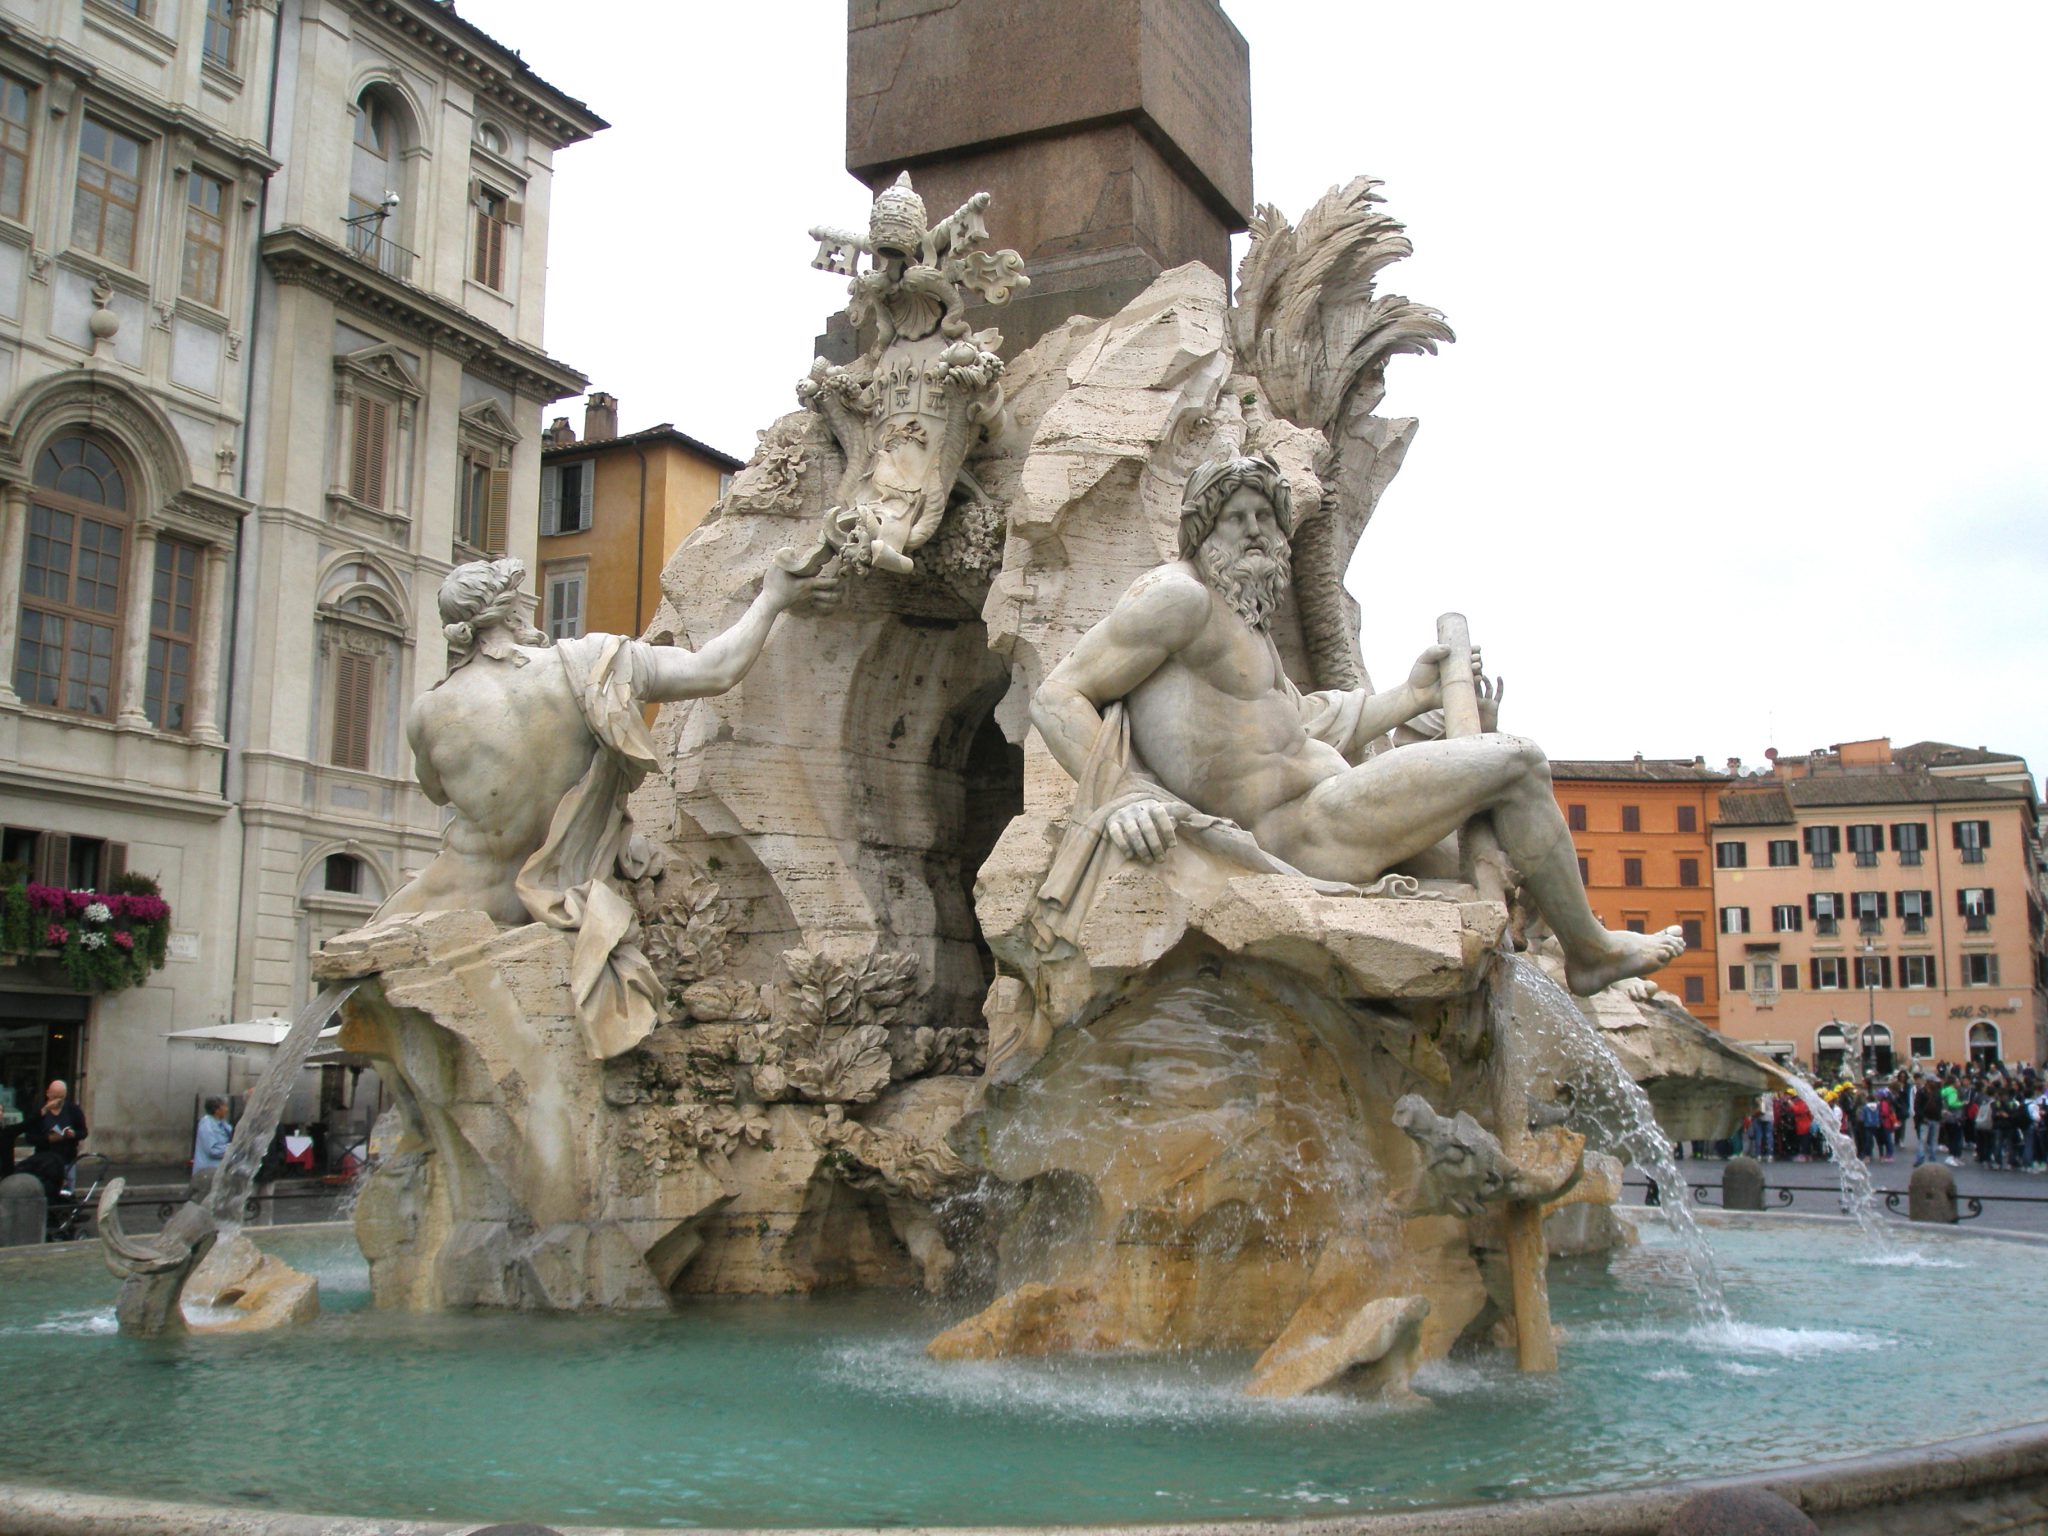 Bernini's Fountain of the Four Rivers, in the rain. The south-facing figures: on the left, The River God of the Danube; on the right, The River God of the Ganges.